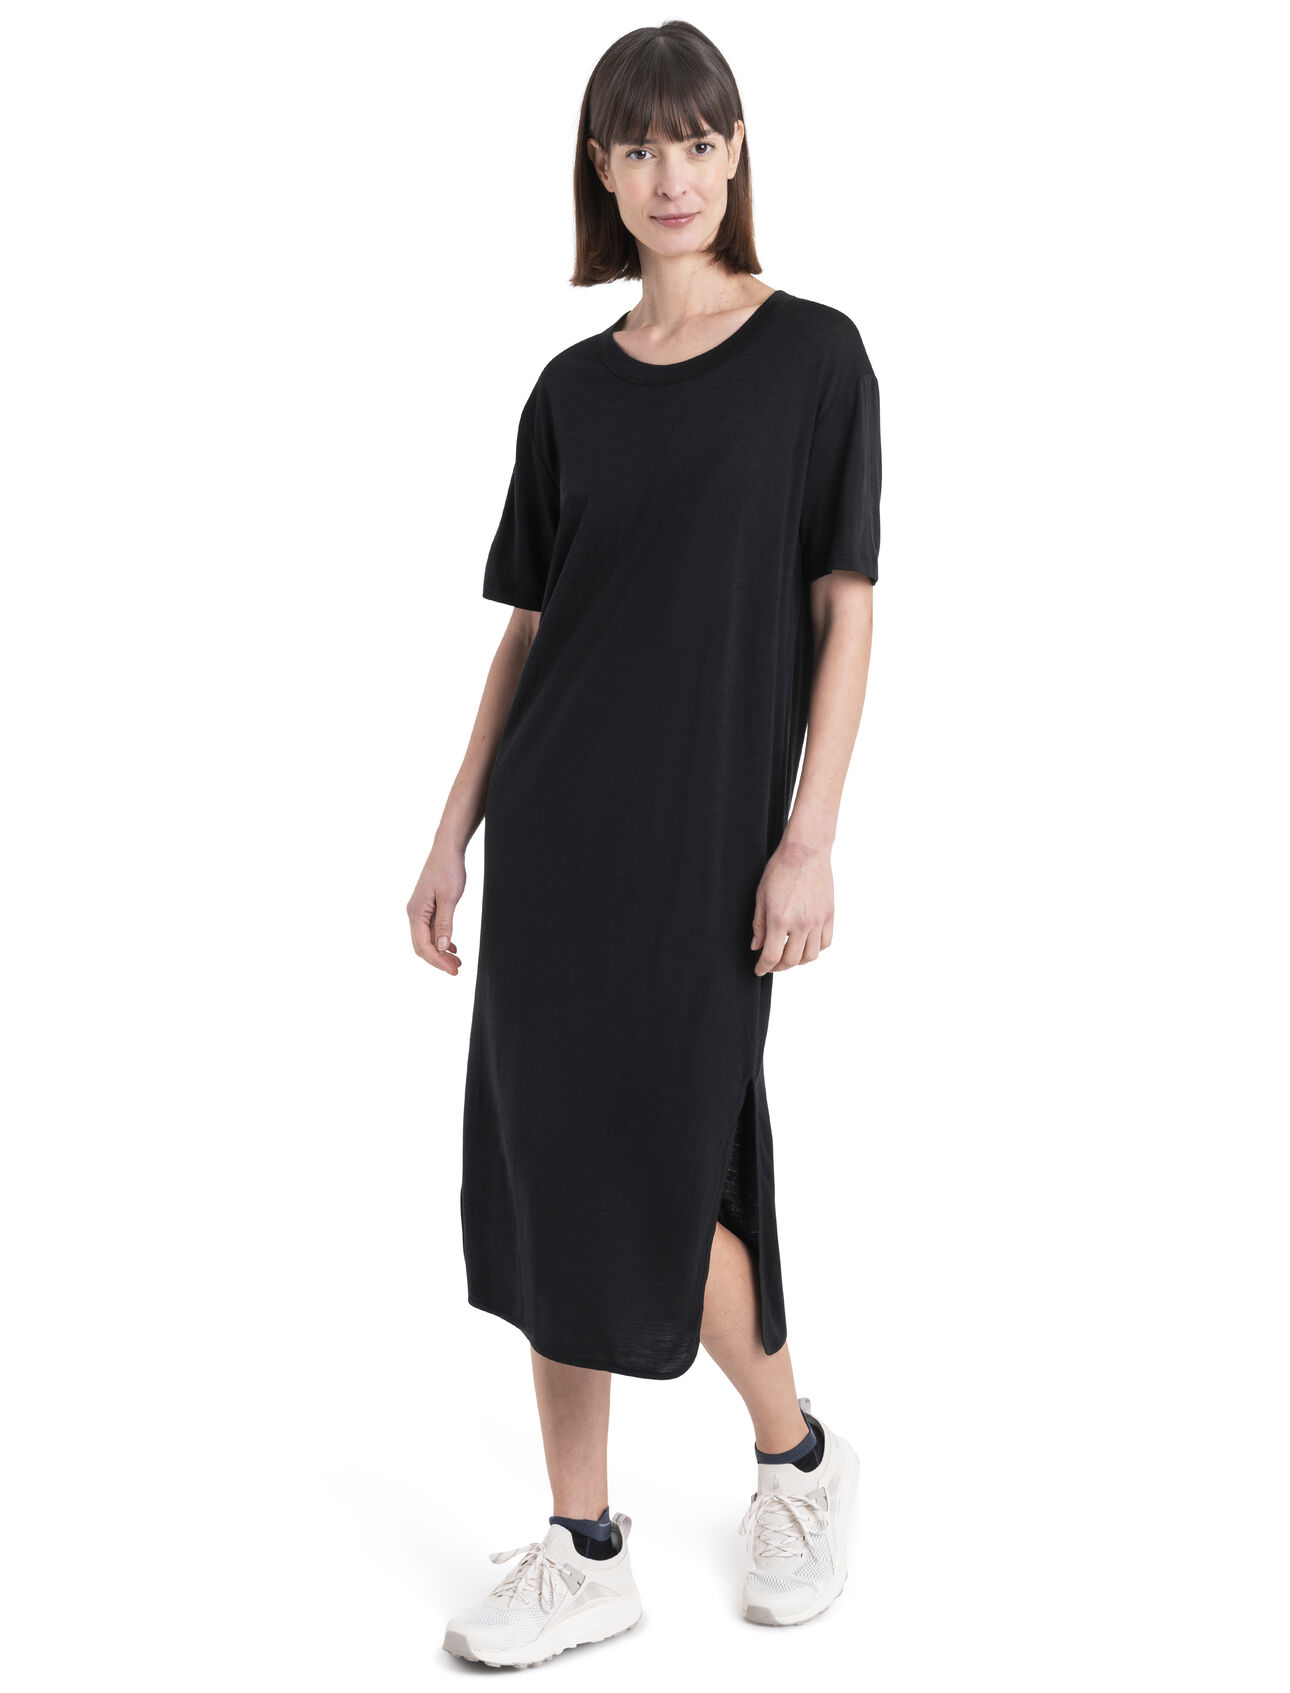 Womens Merino Granary Dress A stylish midi tee dress perfect for lounging or casual everyday excursions, the Granary Tee Dress features soft and breathable 100% merino wool fabric for comfort and style.